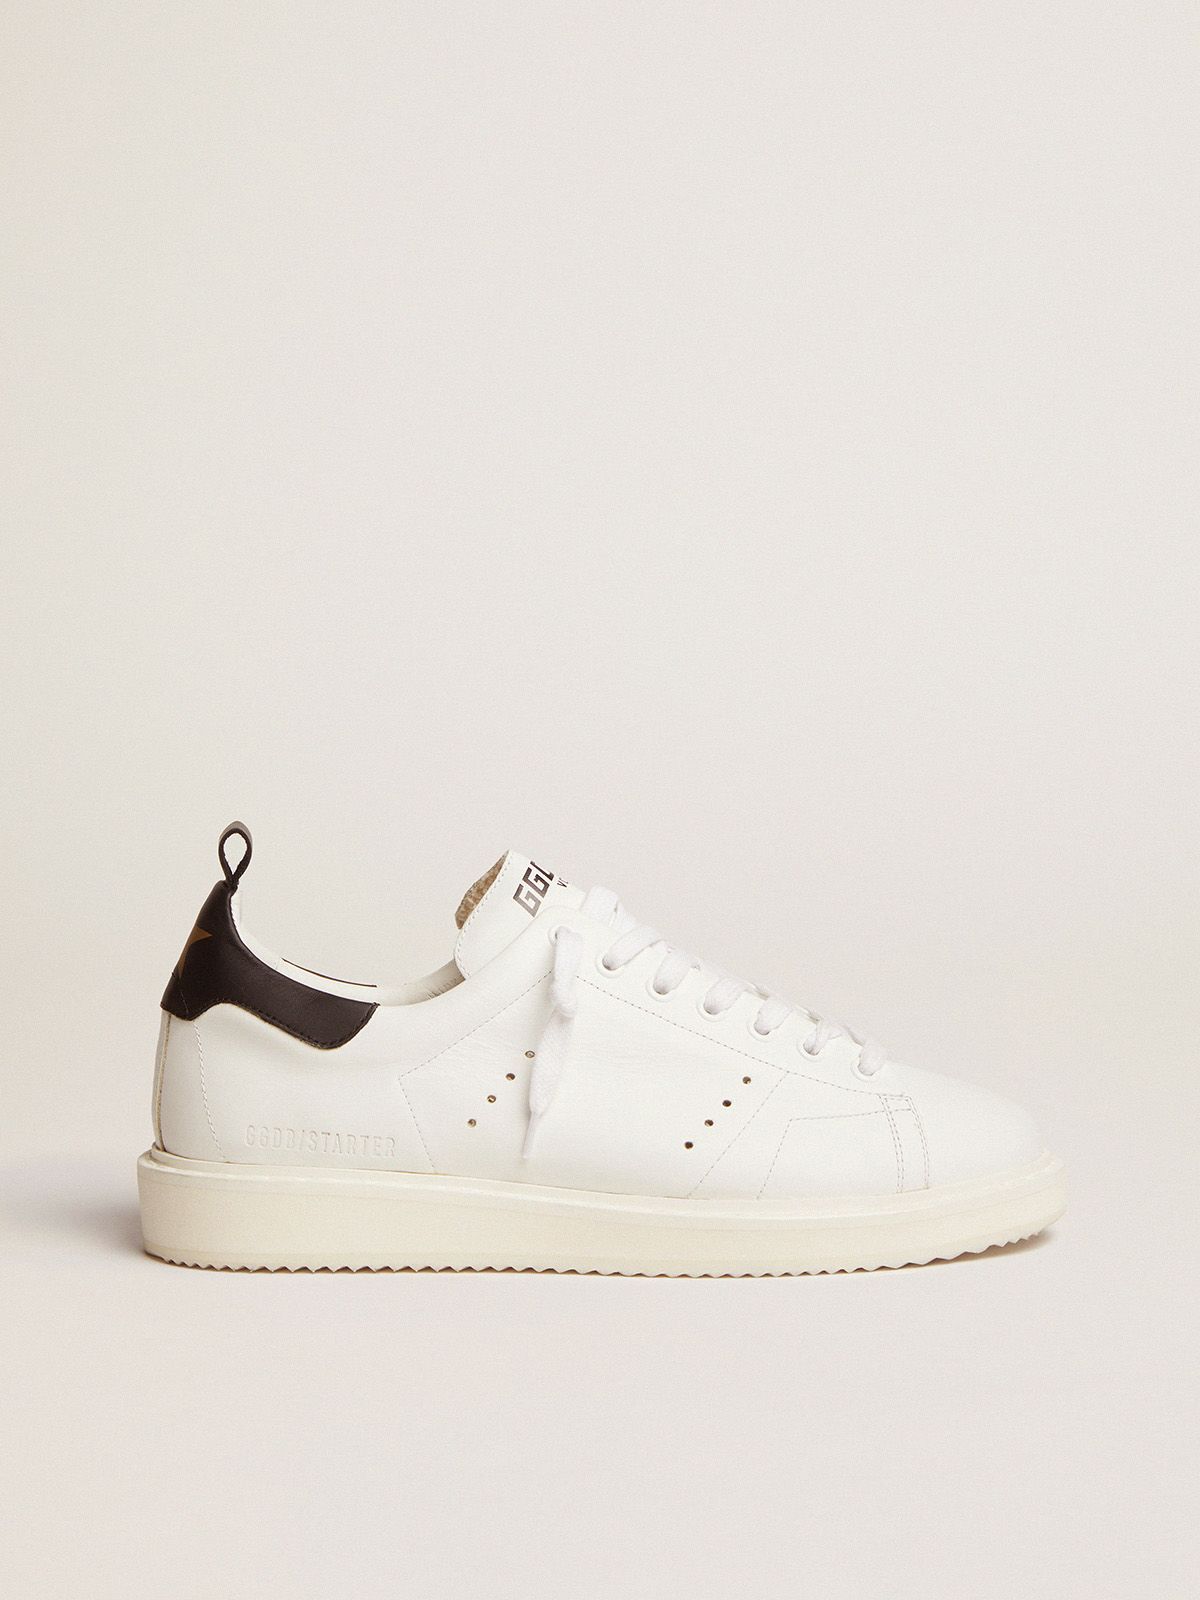 Starter sneakers in leather with black heel tab